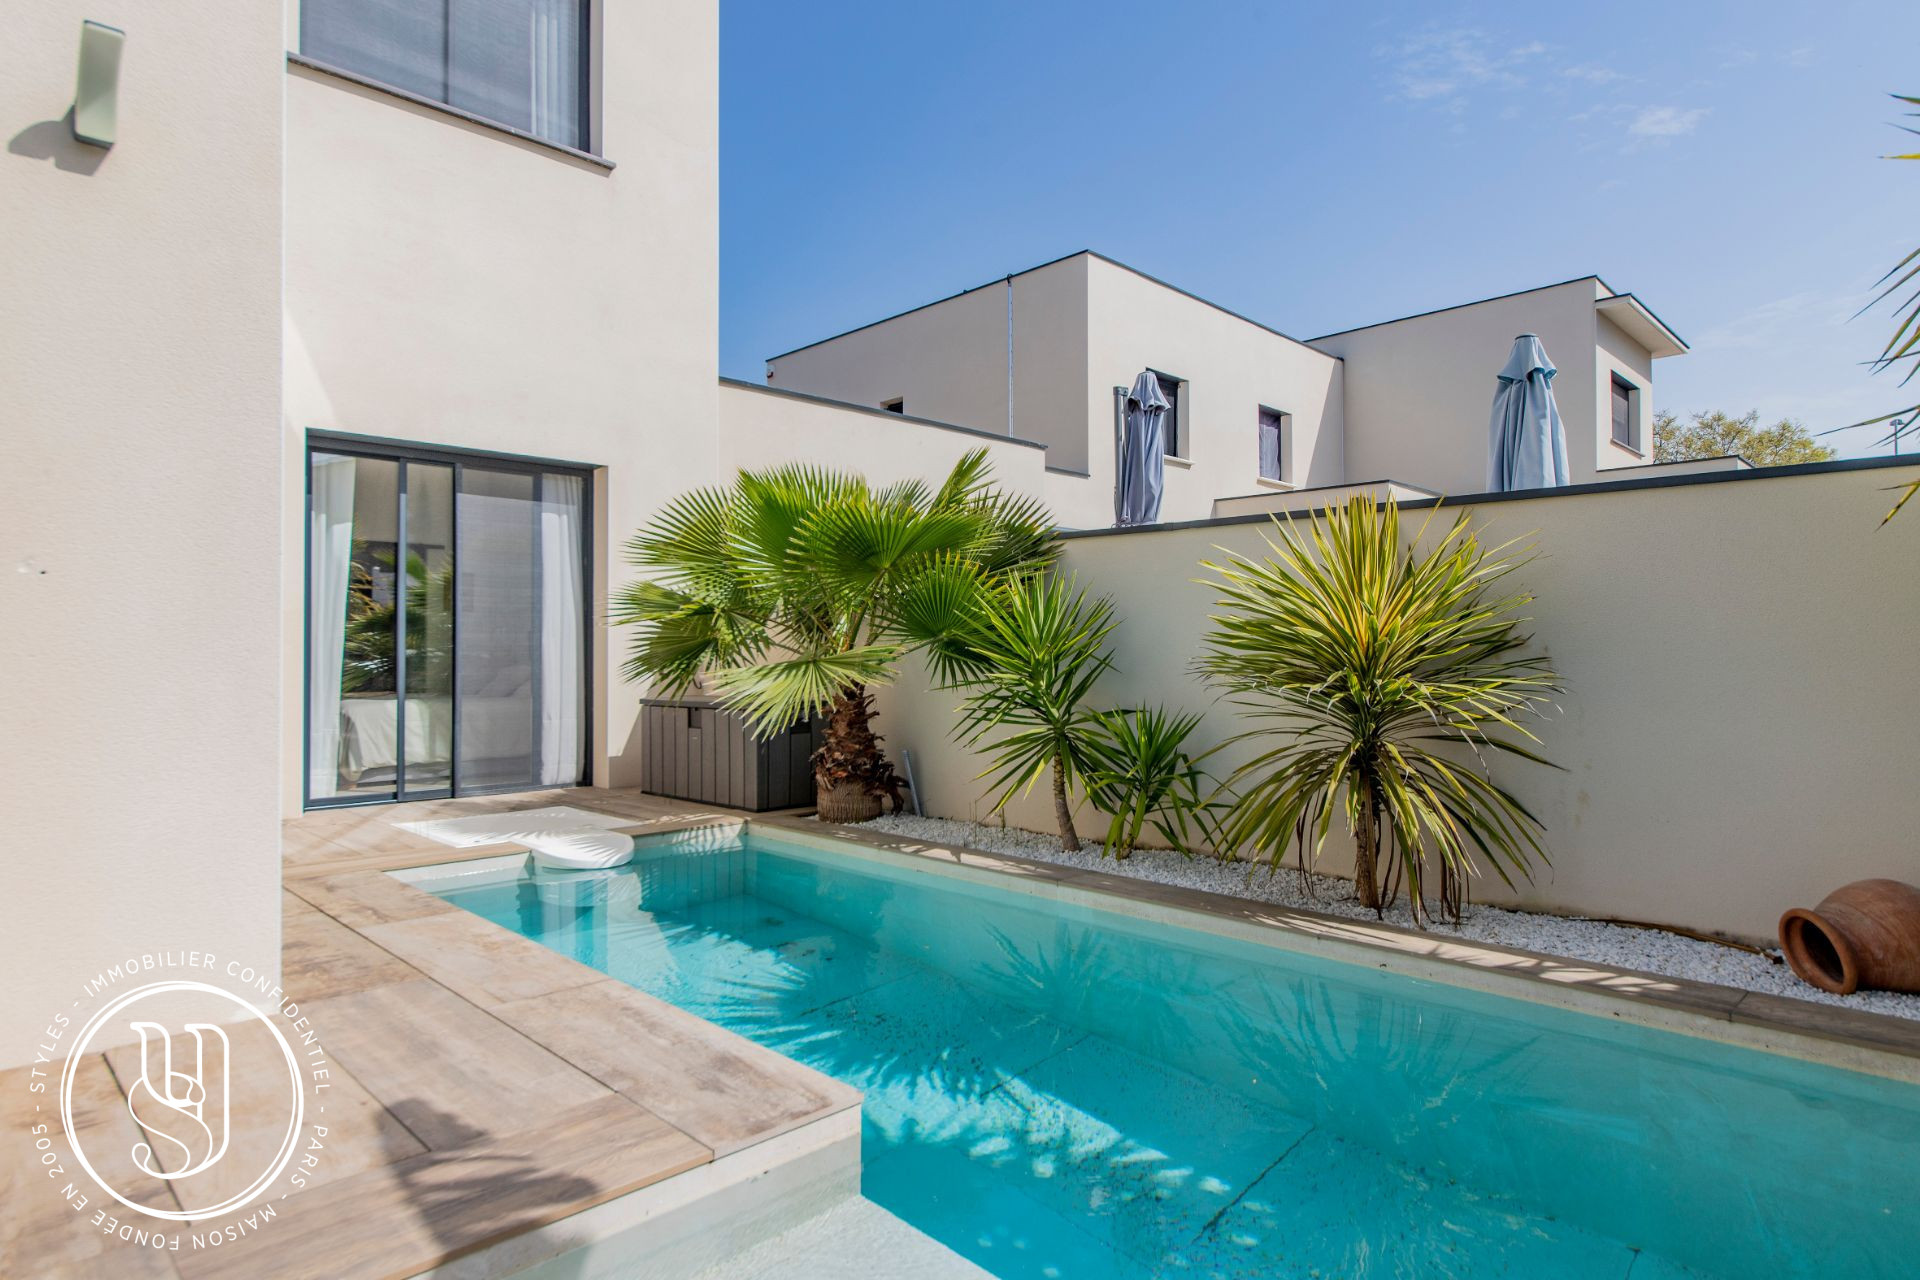 Montpellier - close, a contemporary close to the sea - image 9